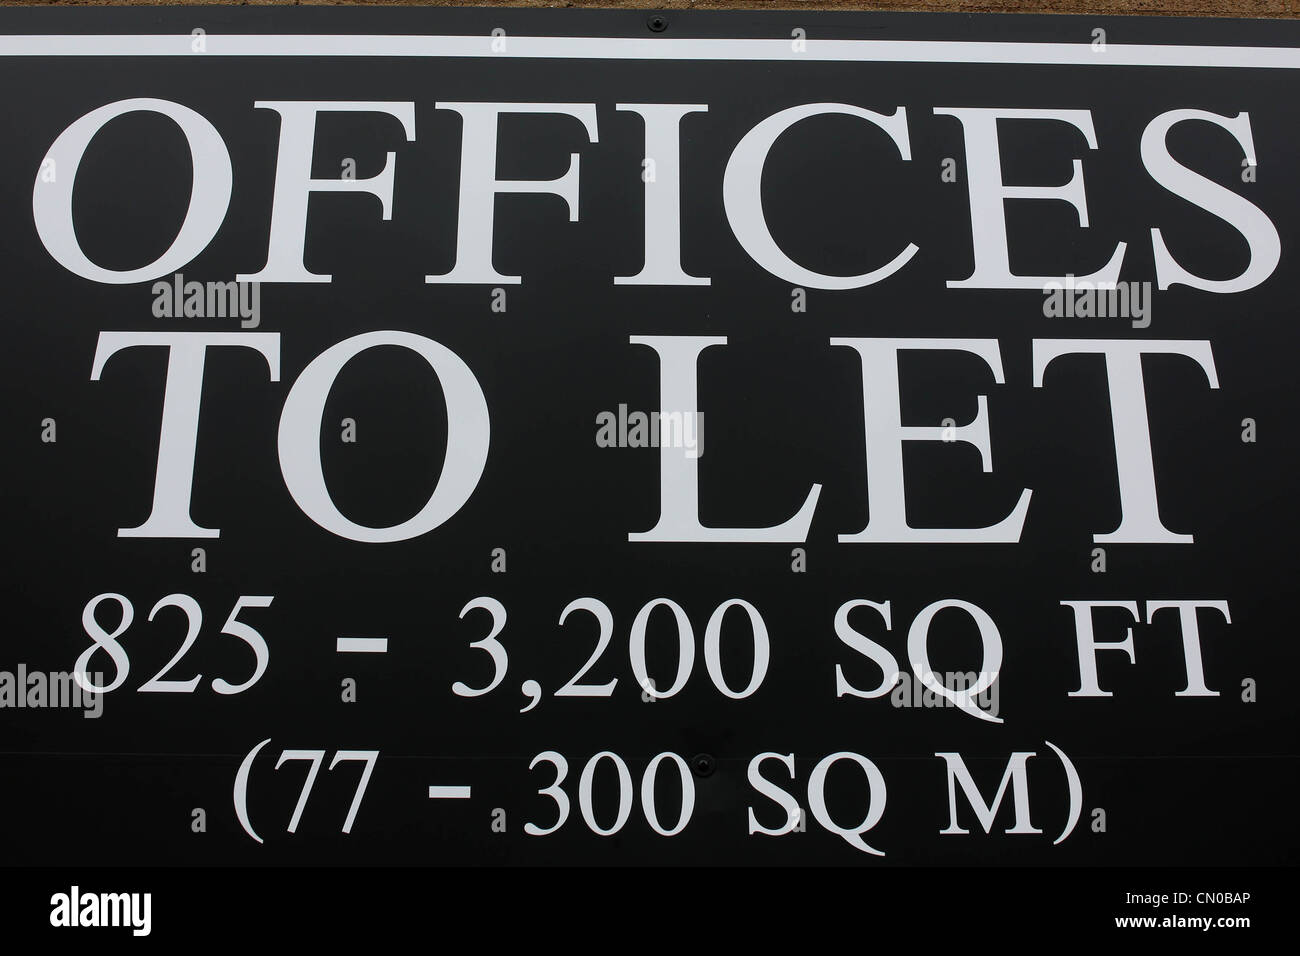 Offices to let sign Stock Photo